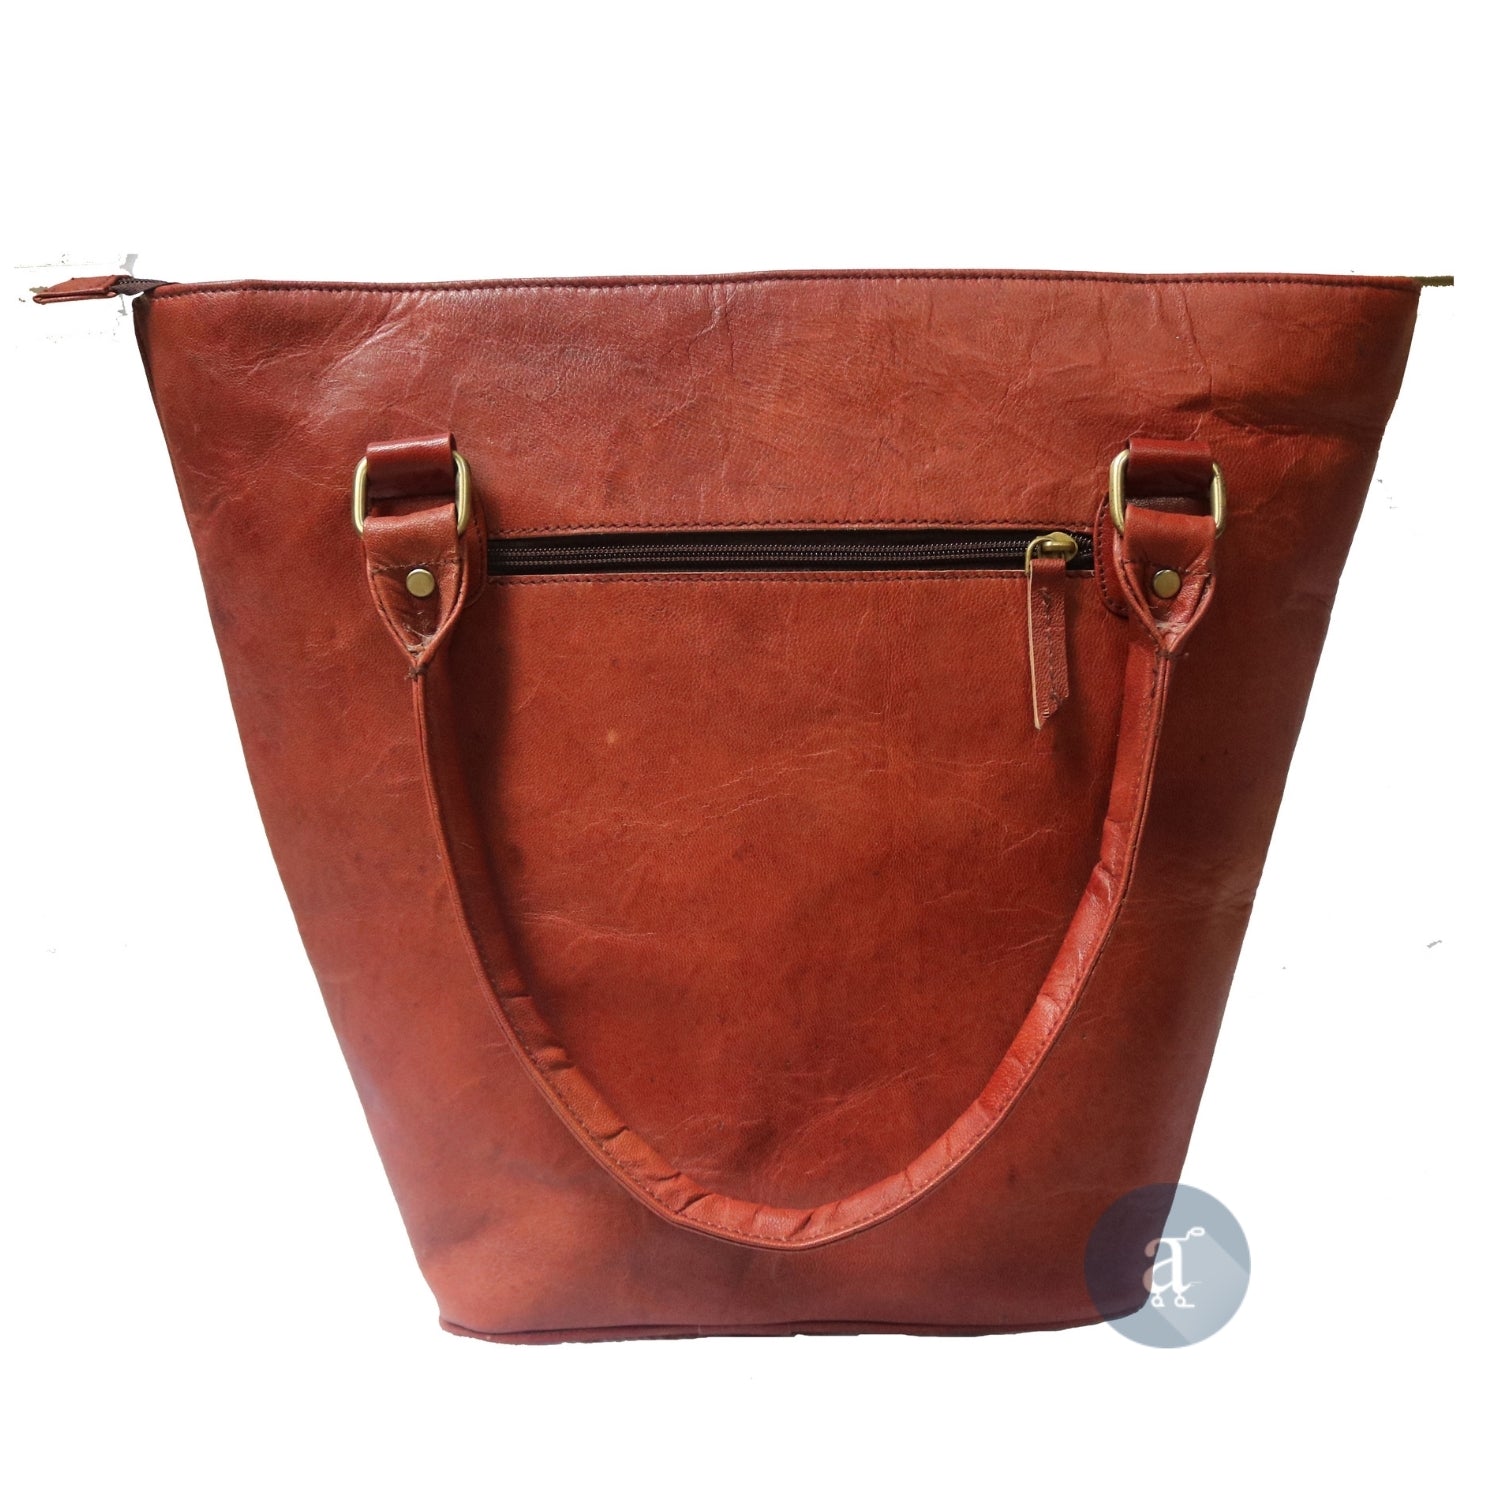 leather tote bag with zipper